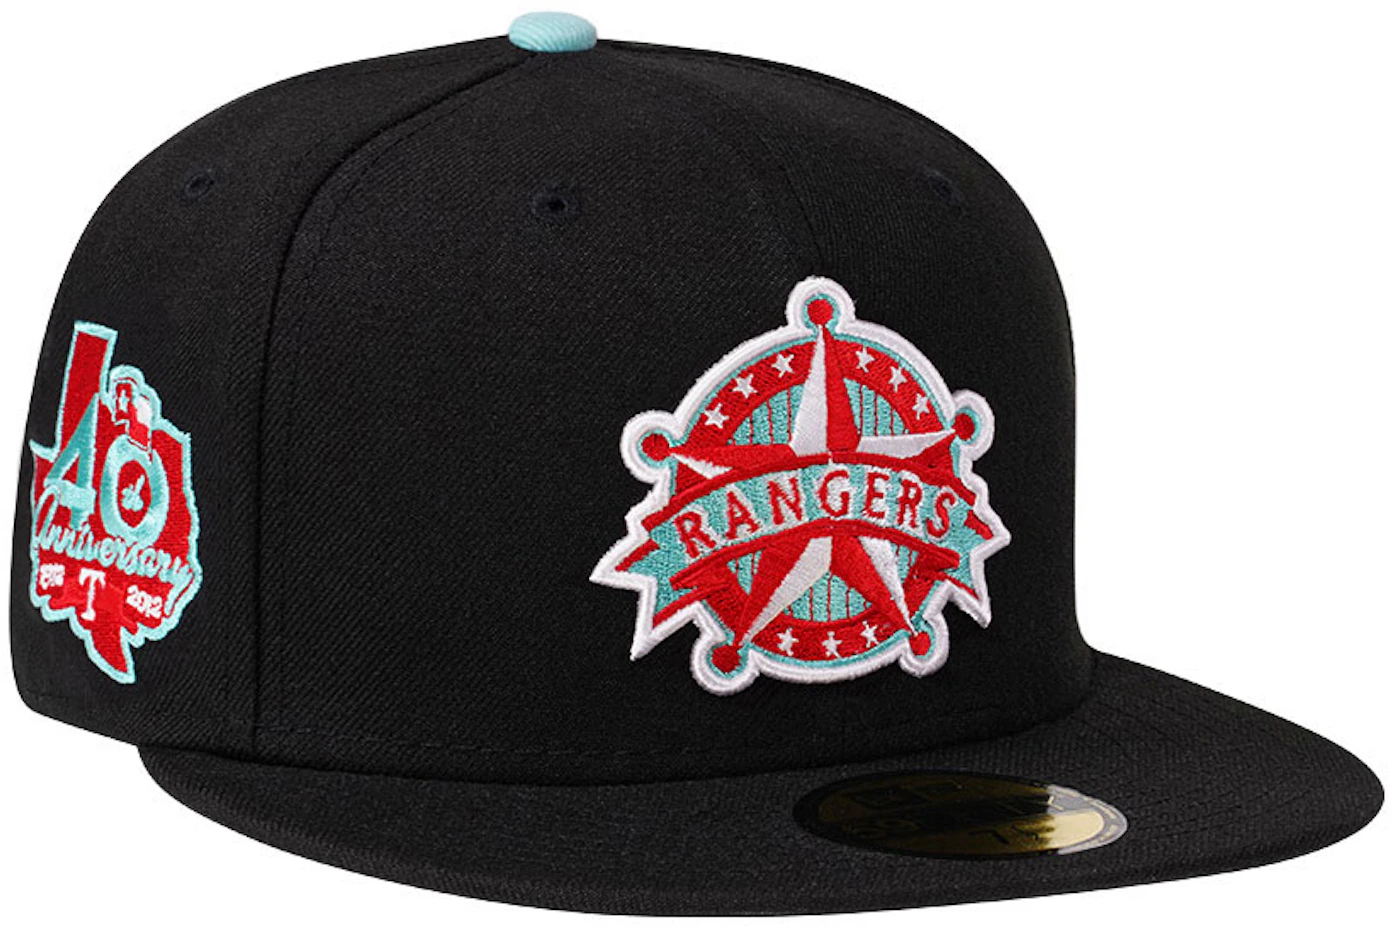 Texas Rangers 40th Anniversary New Era 59FIFTY Fitted Hat (Clear Mint Black Hunter Flame Orange Under BRIM) 7 1/8